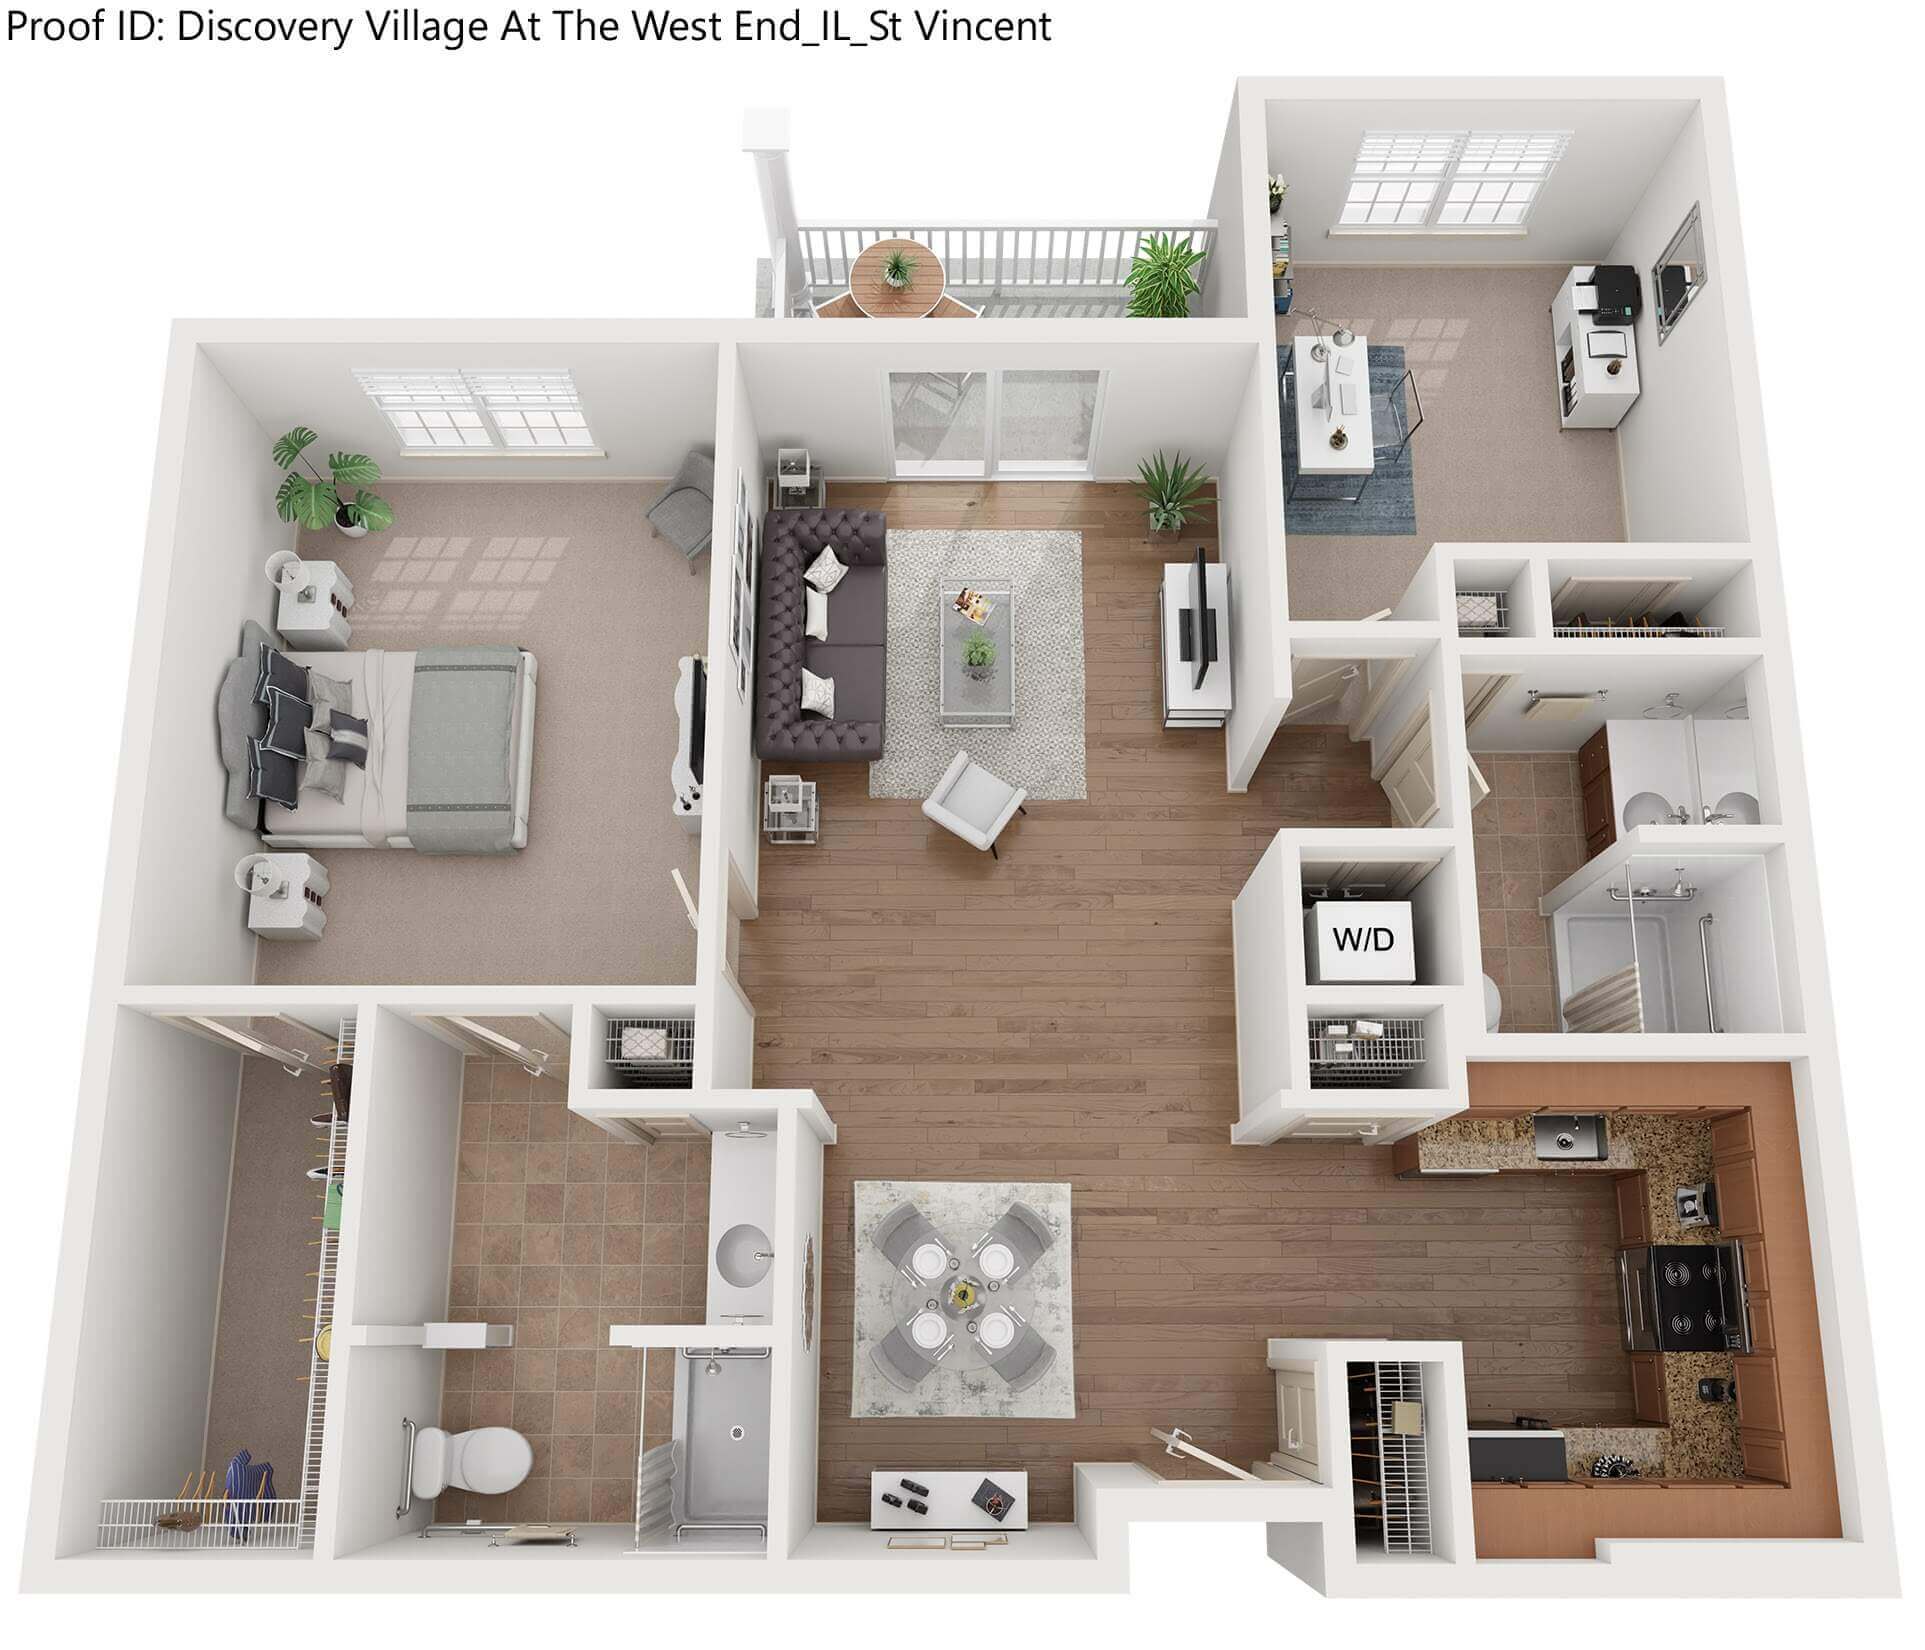 Discovery-Village-At-The-West-End-3D-Proof-2-JPEG_Page_12